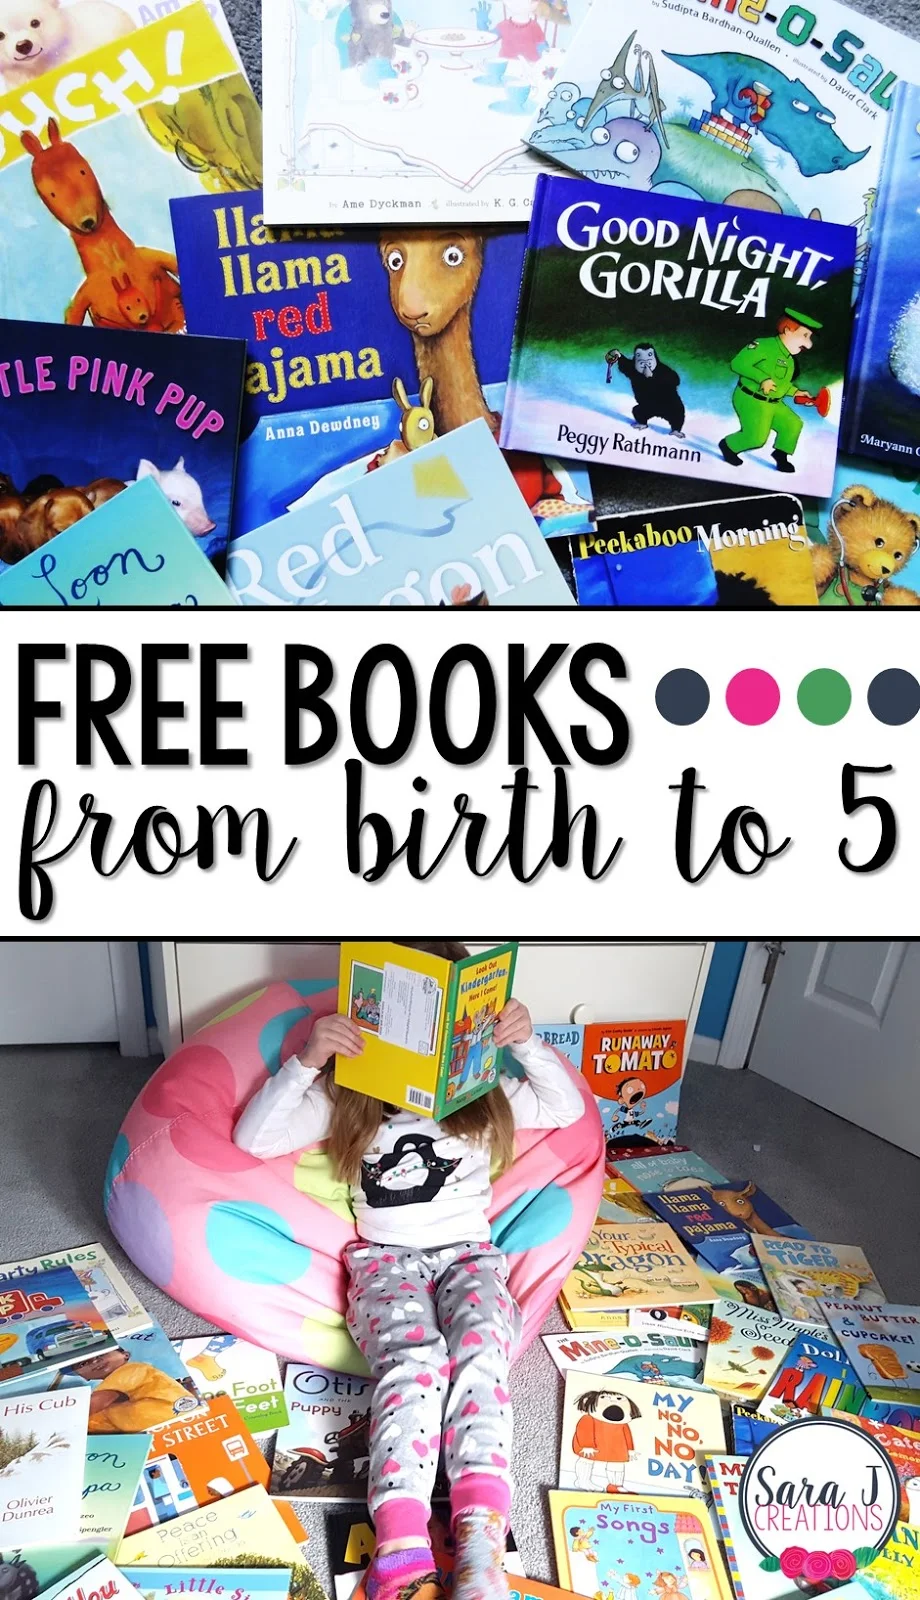 Free children's books from birth through age 5 thanks to Dolly Parton's Imagination Library.  So many awesome picture books for free.